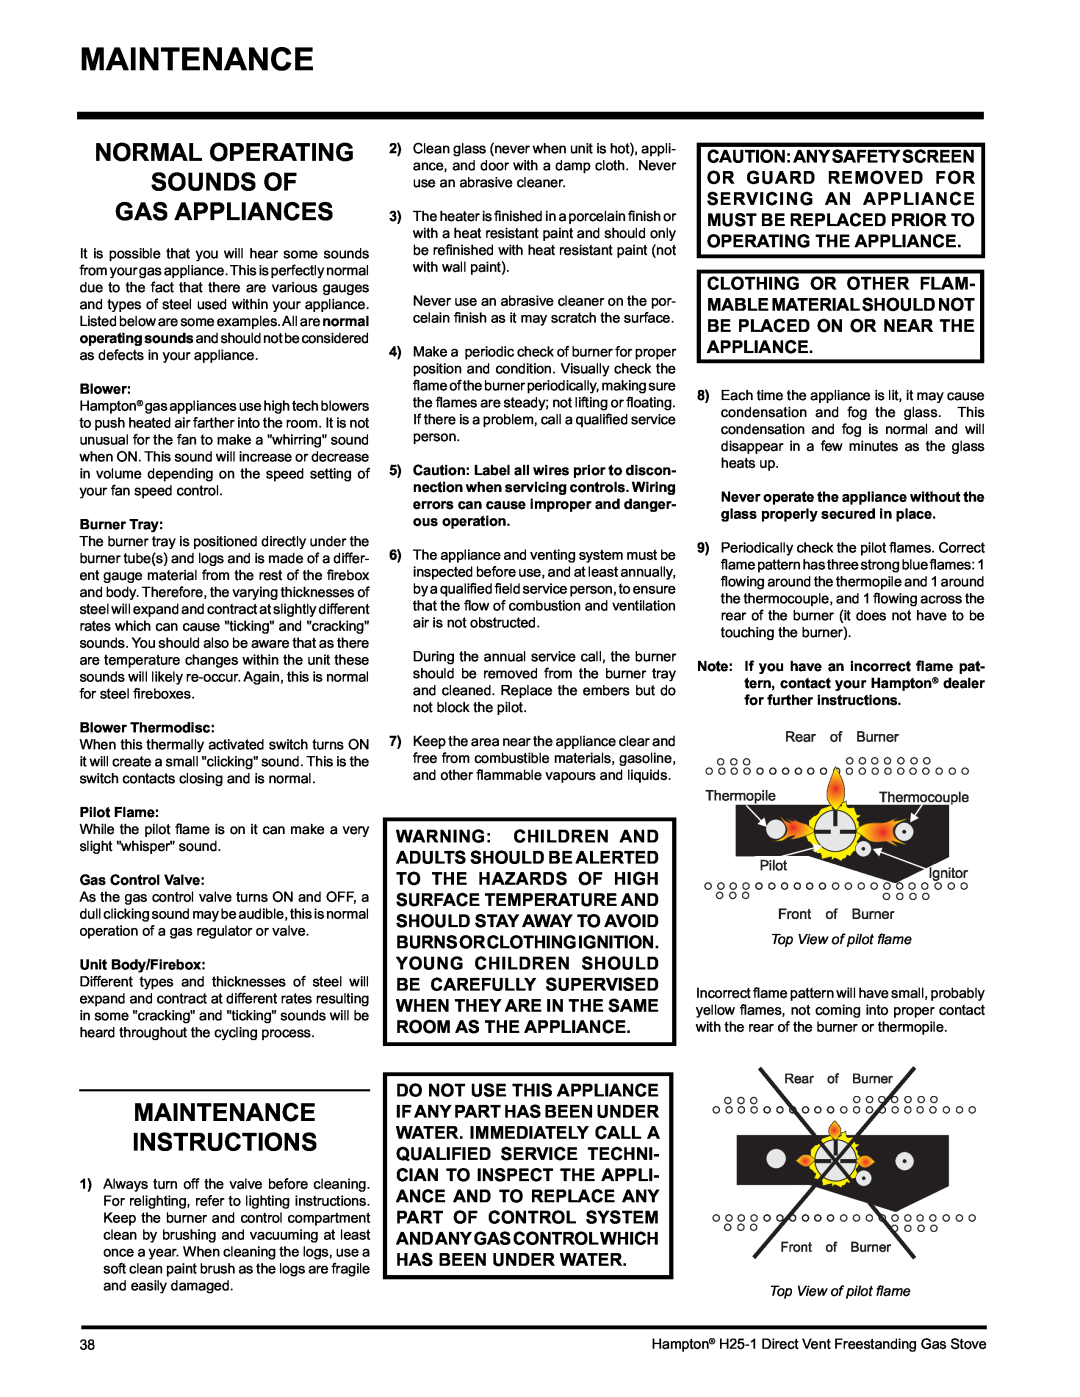 Hampton Direct H25-NG1, H25-LP1 installation manual Normal Operating Sounds Of Gas Appliances, Maintenance Instructions 